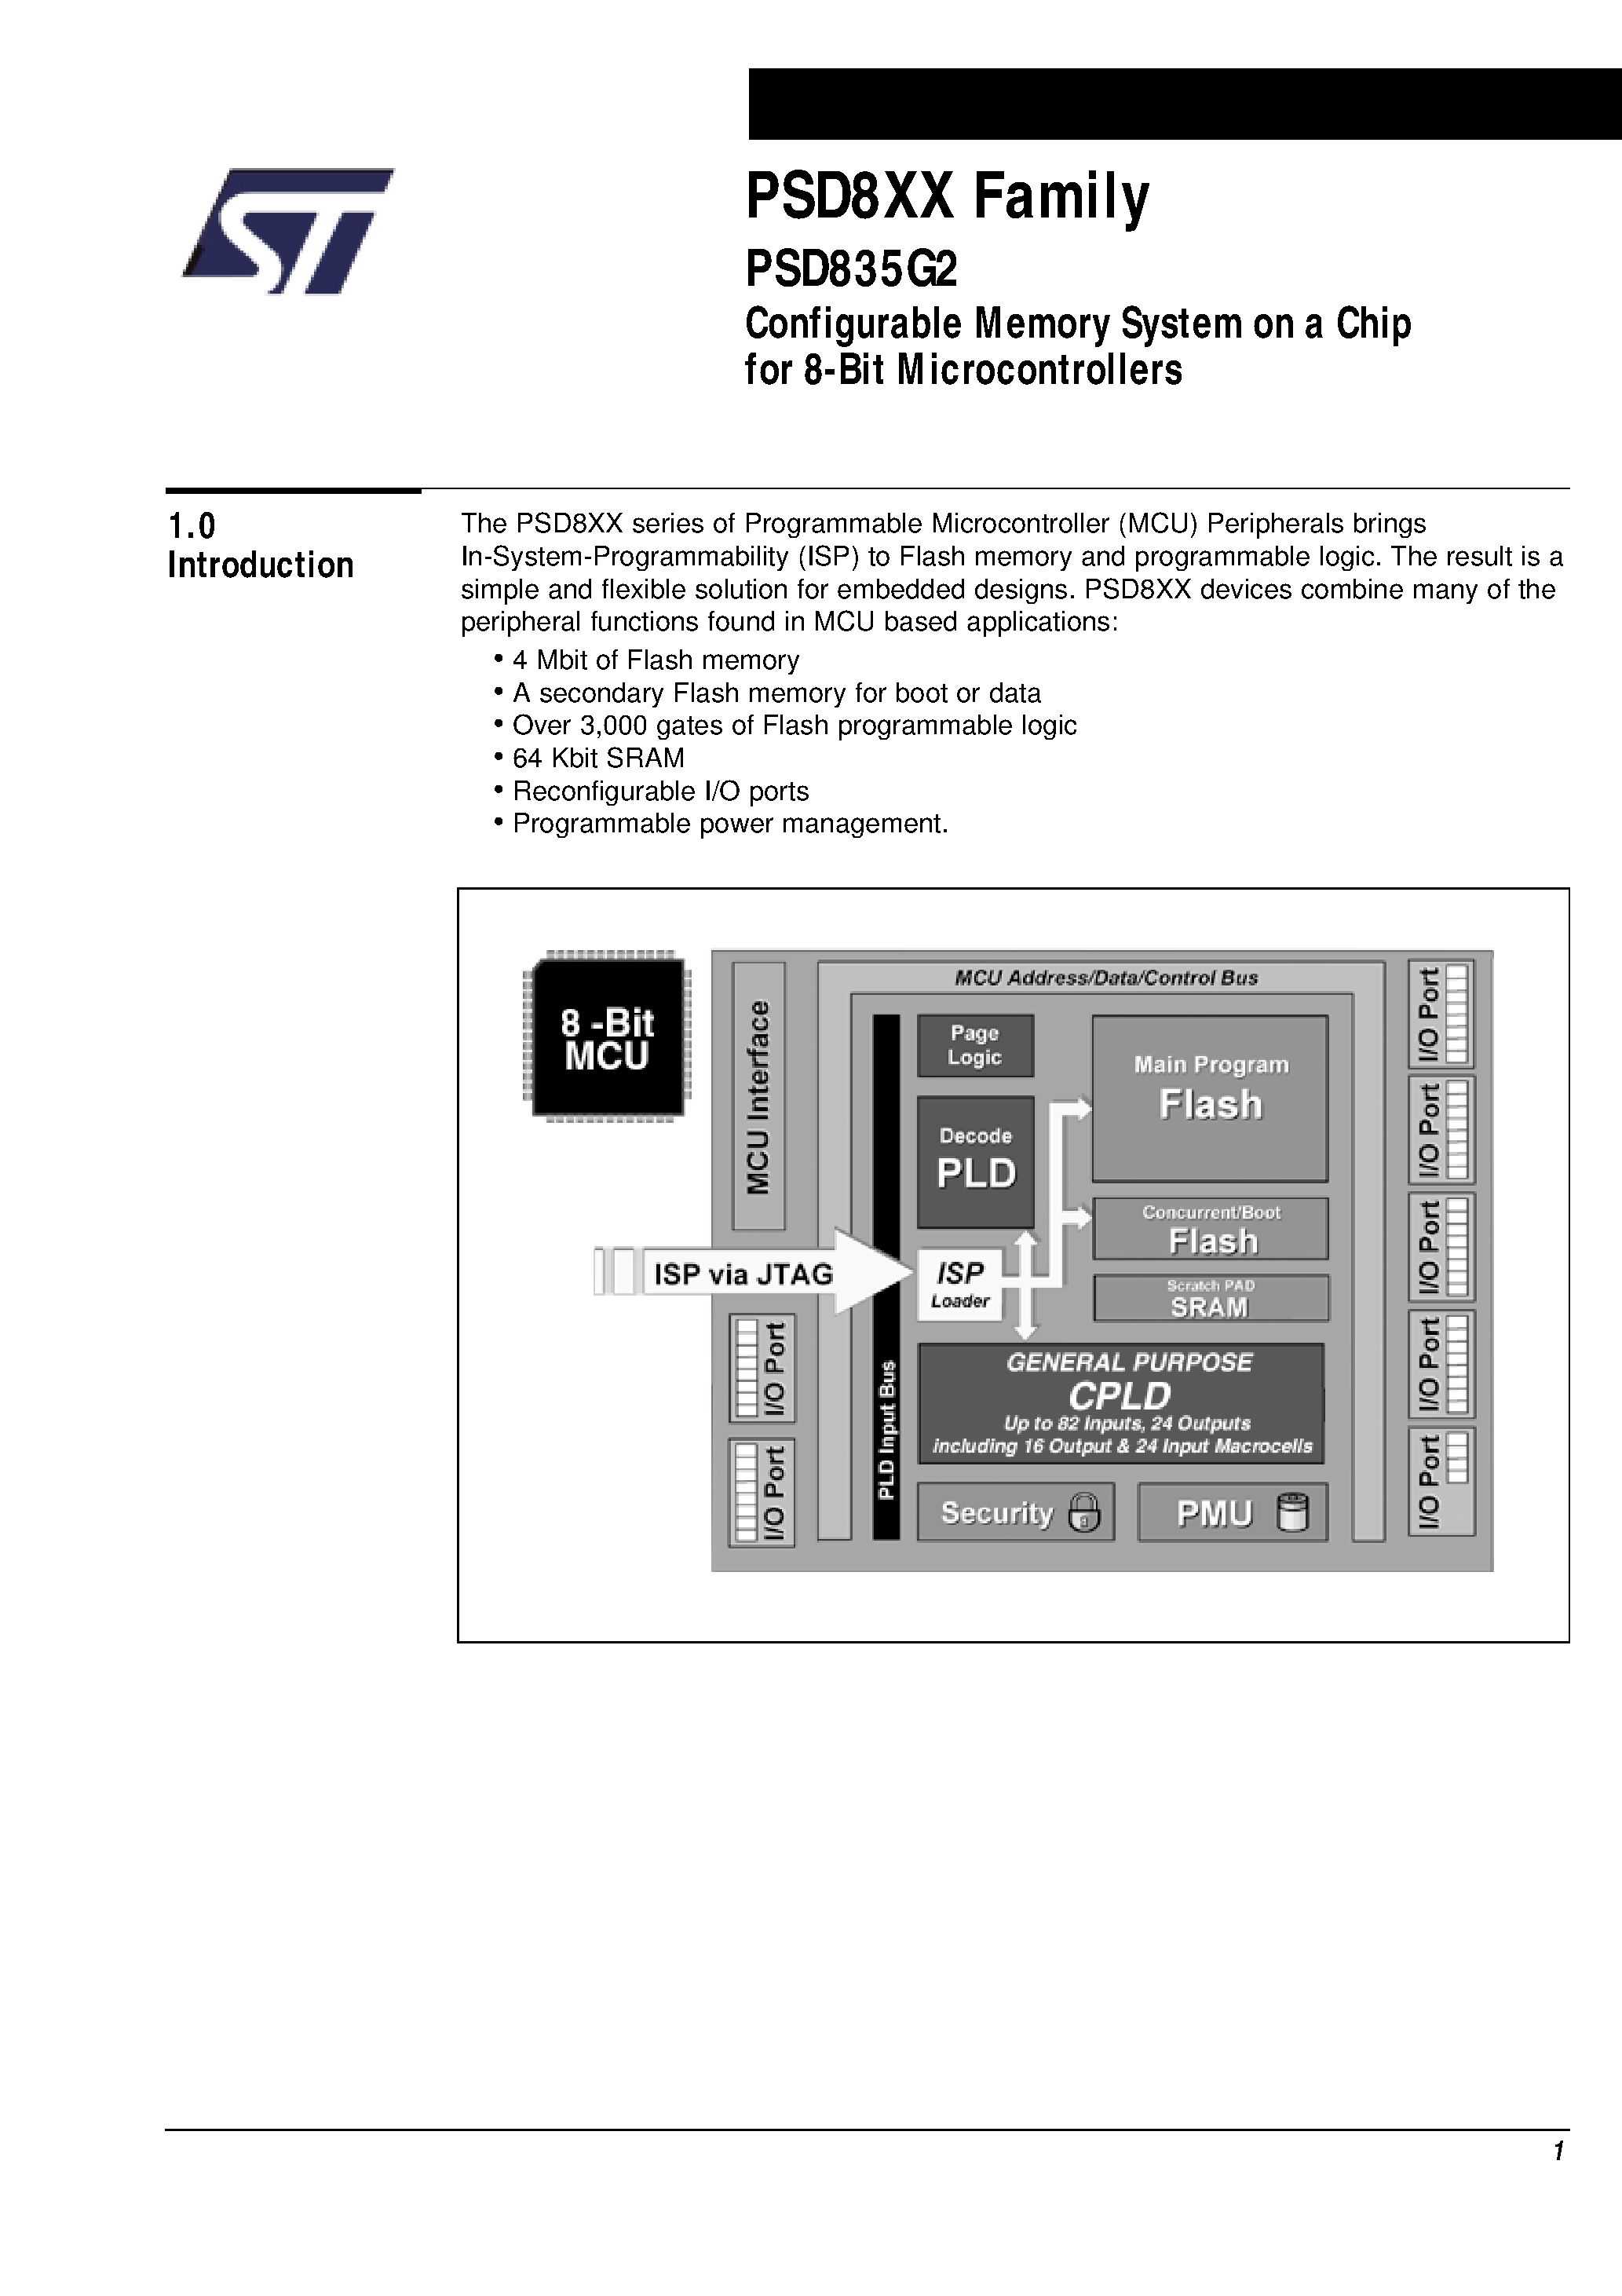 Datasheet PSD835F2V-A-70B81I - Configurable Memory System on a Chip for 8-Bit Microcontrollers page 2